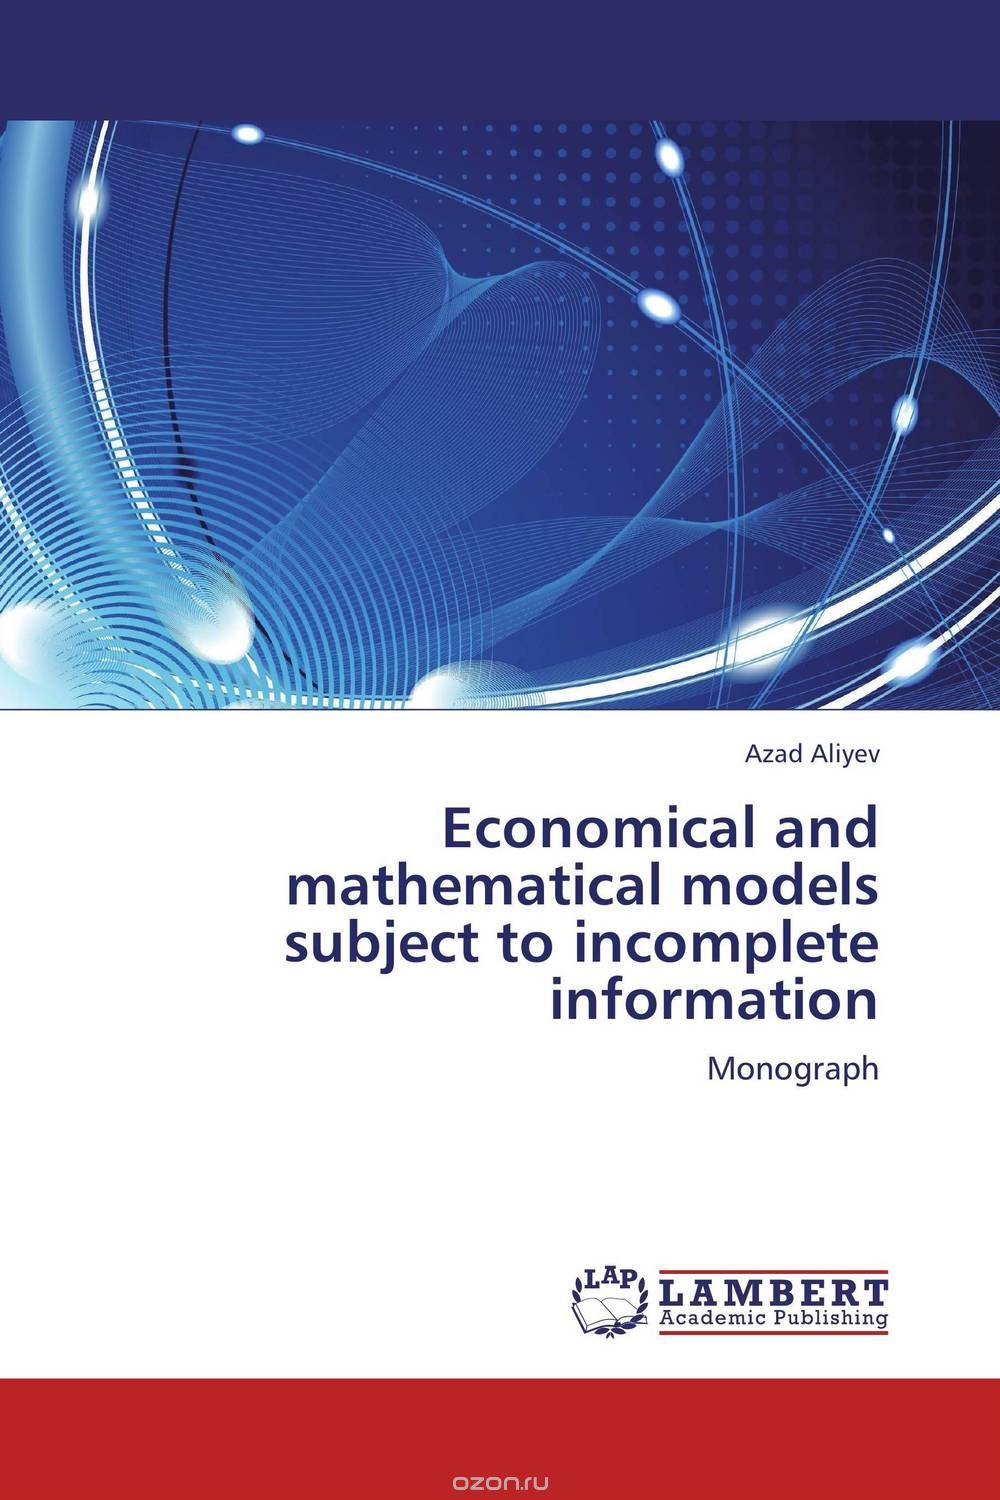 Скачать книгу "Economical and mathematical models subject to incomplete information"